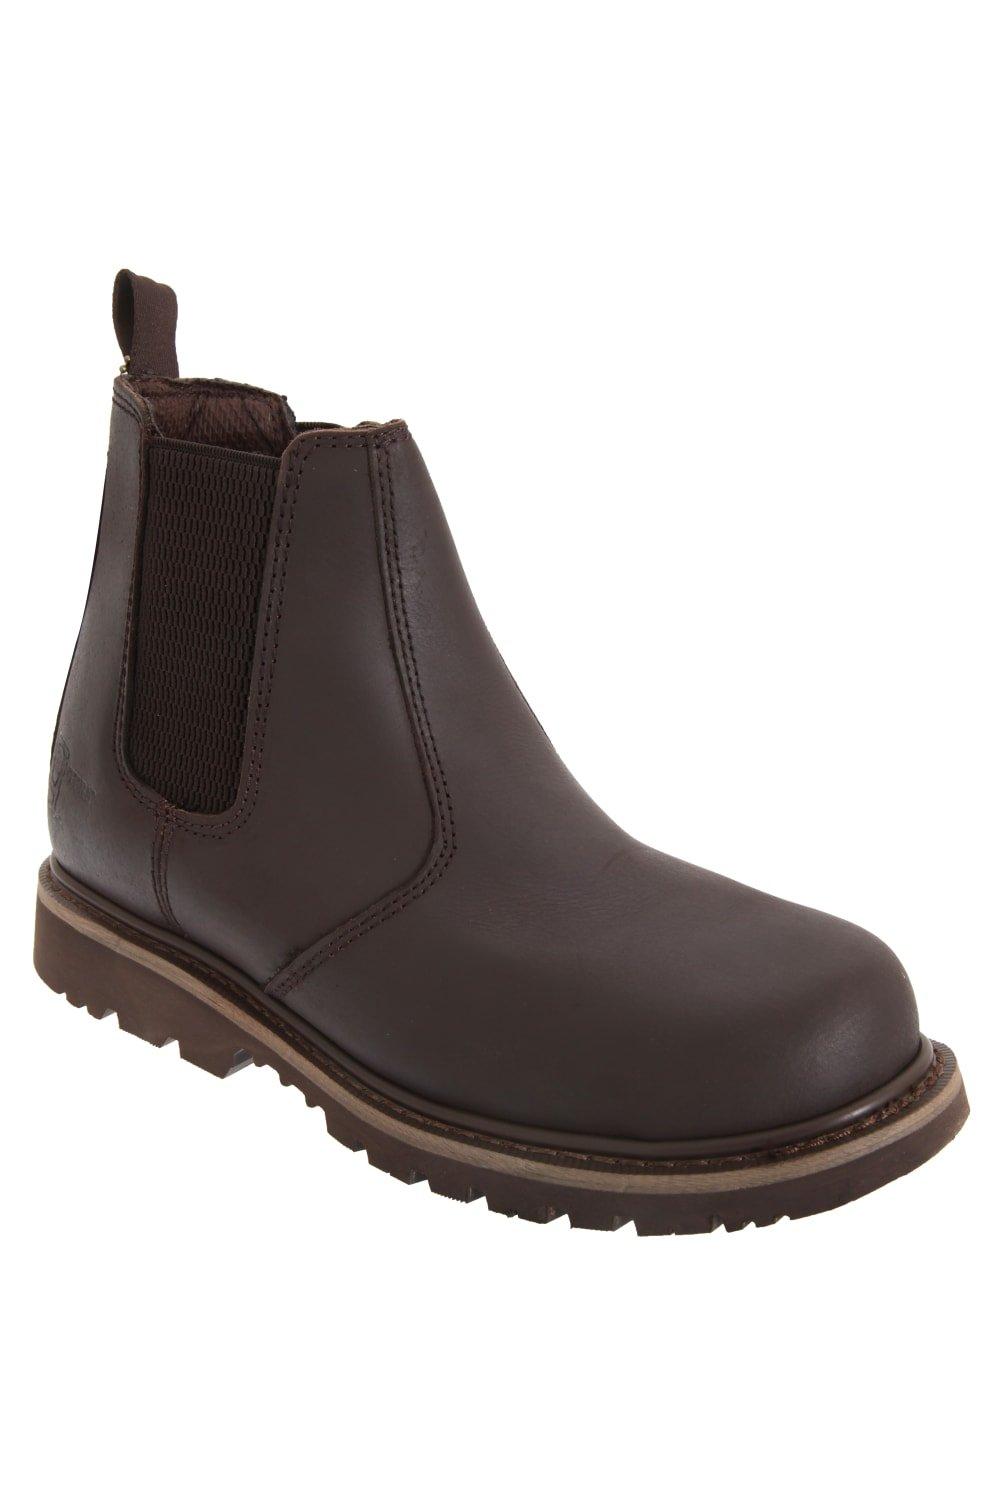 Safety Chelsea Boots